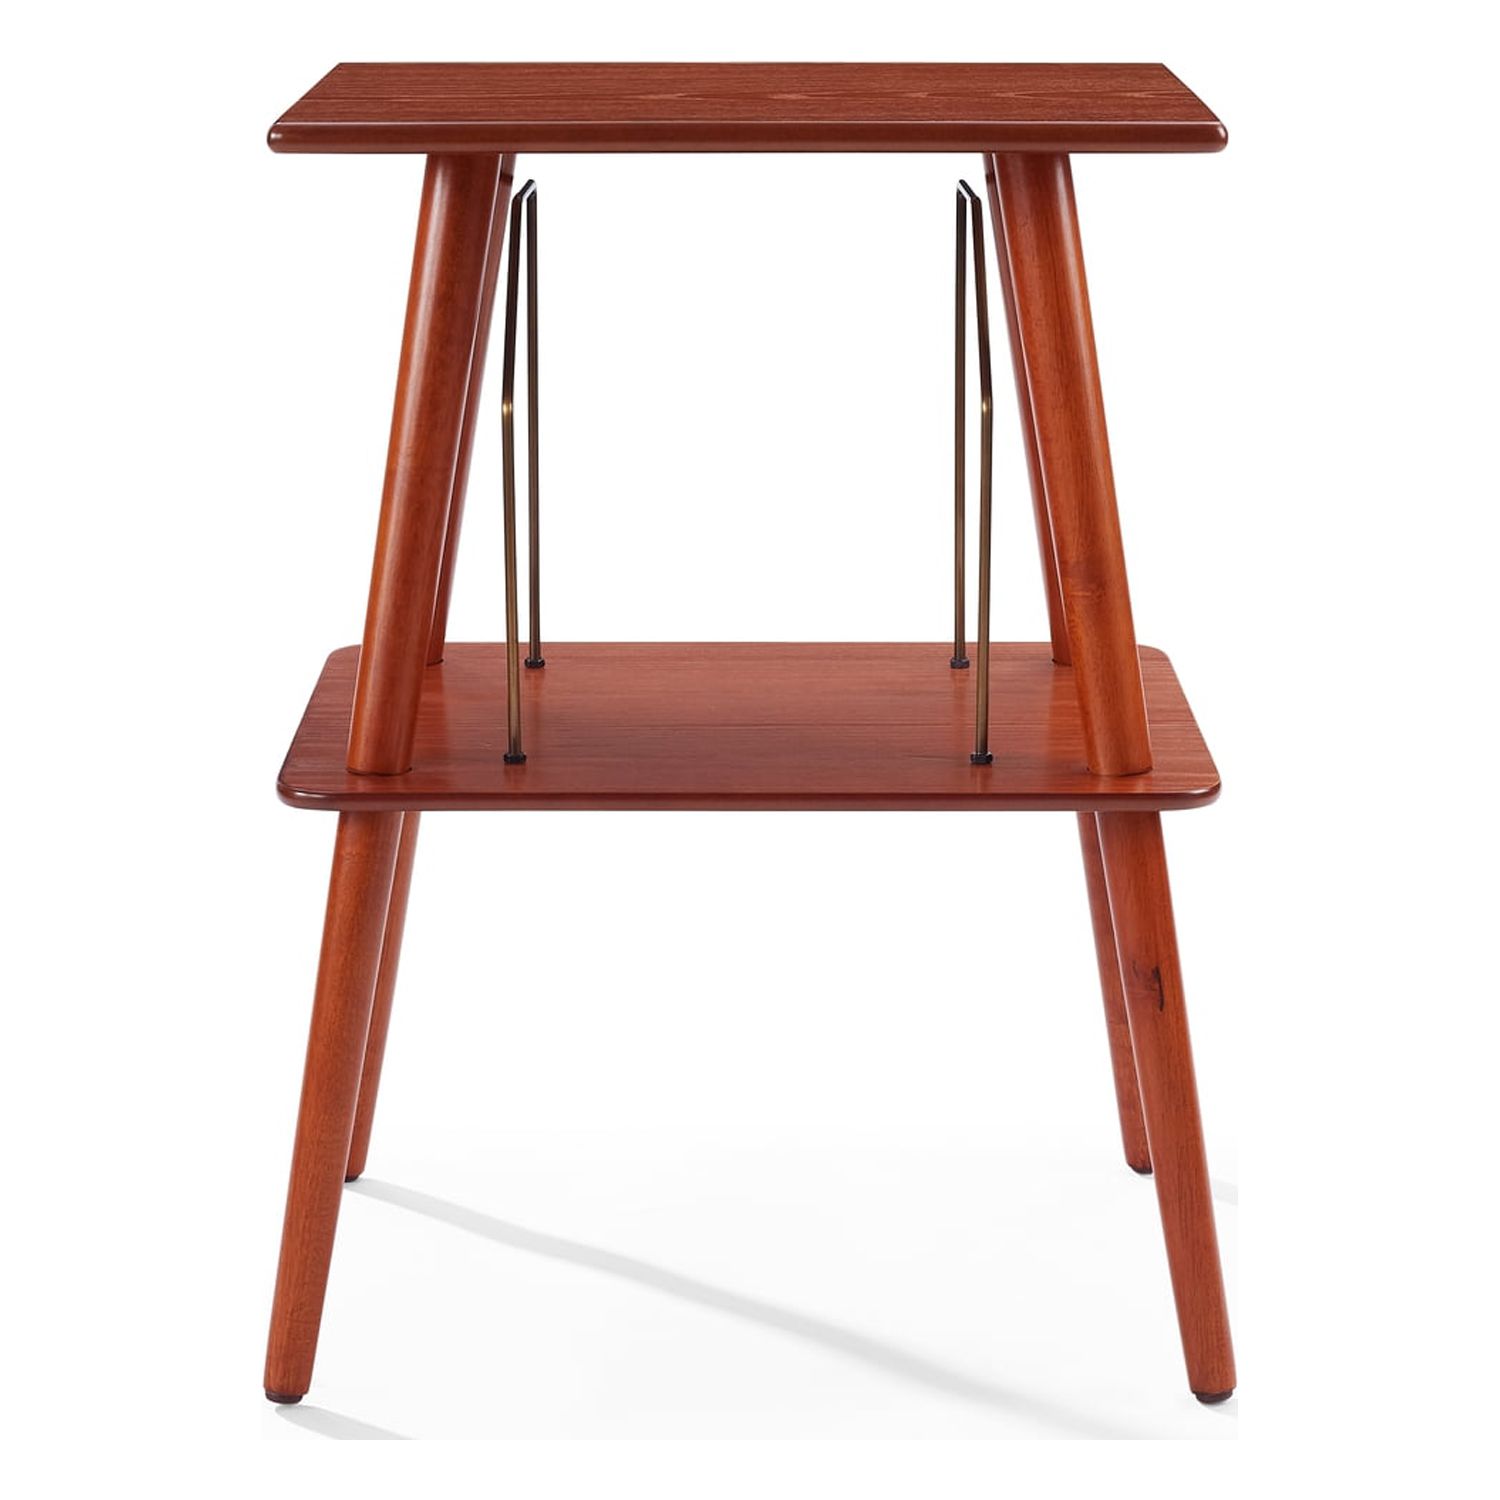 Crosley Furniture Manchester Mid-Century Wood Metal Turntable Stand in Paprika - image 3 of 5